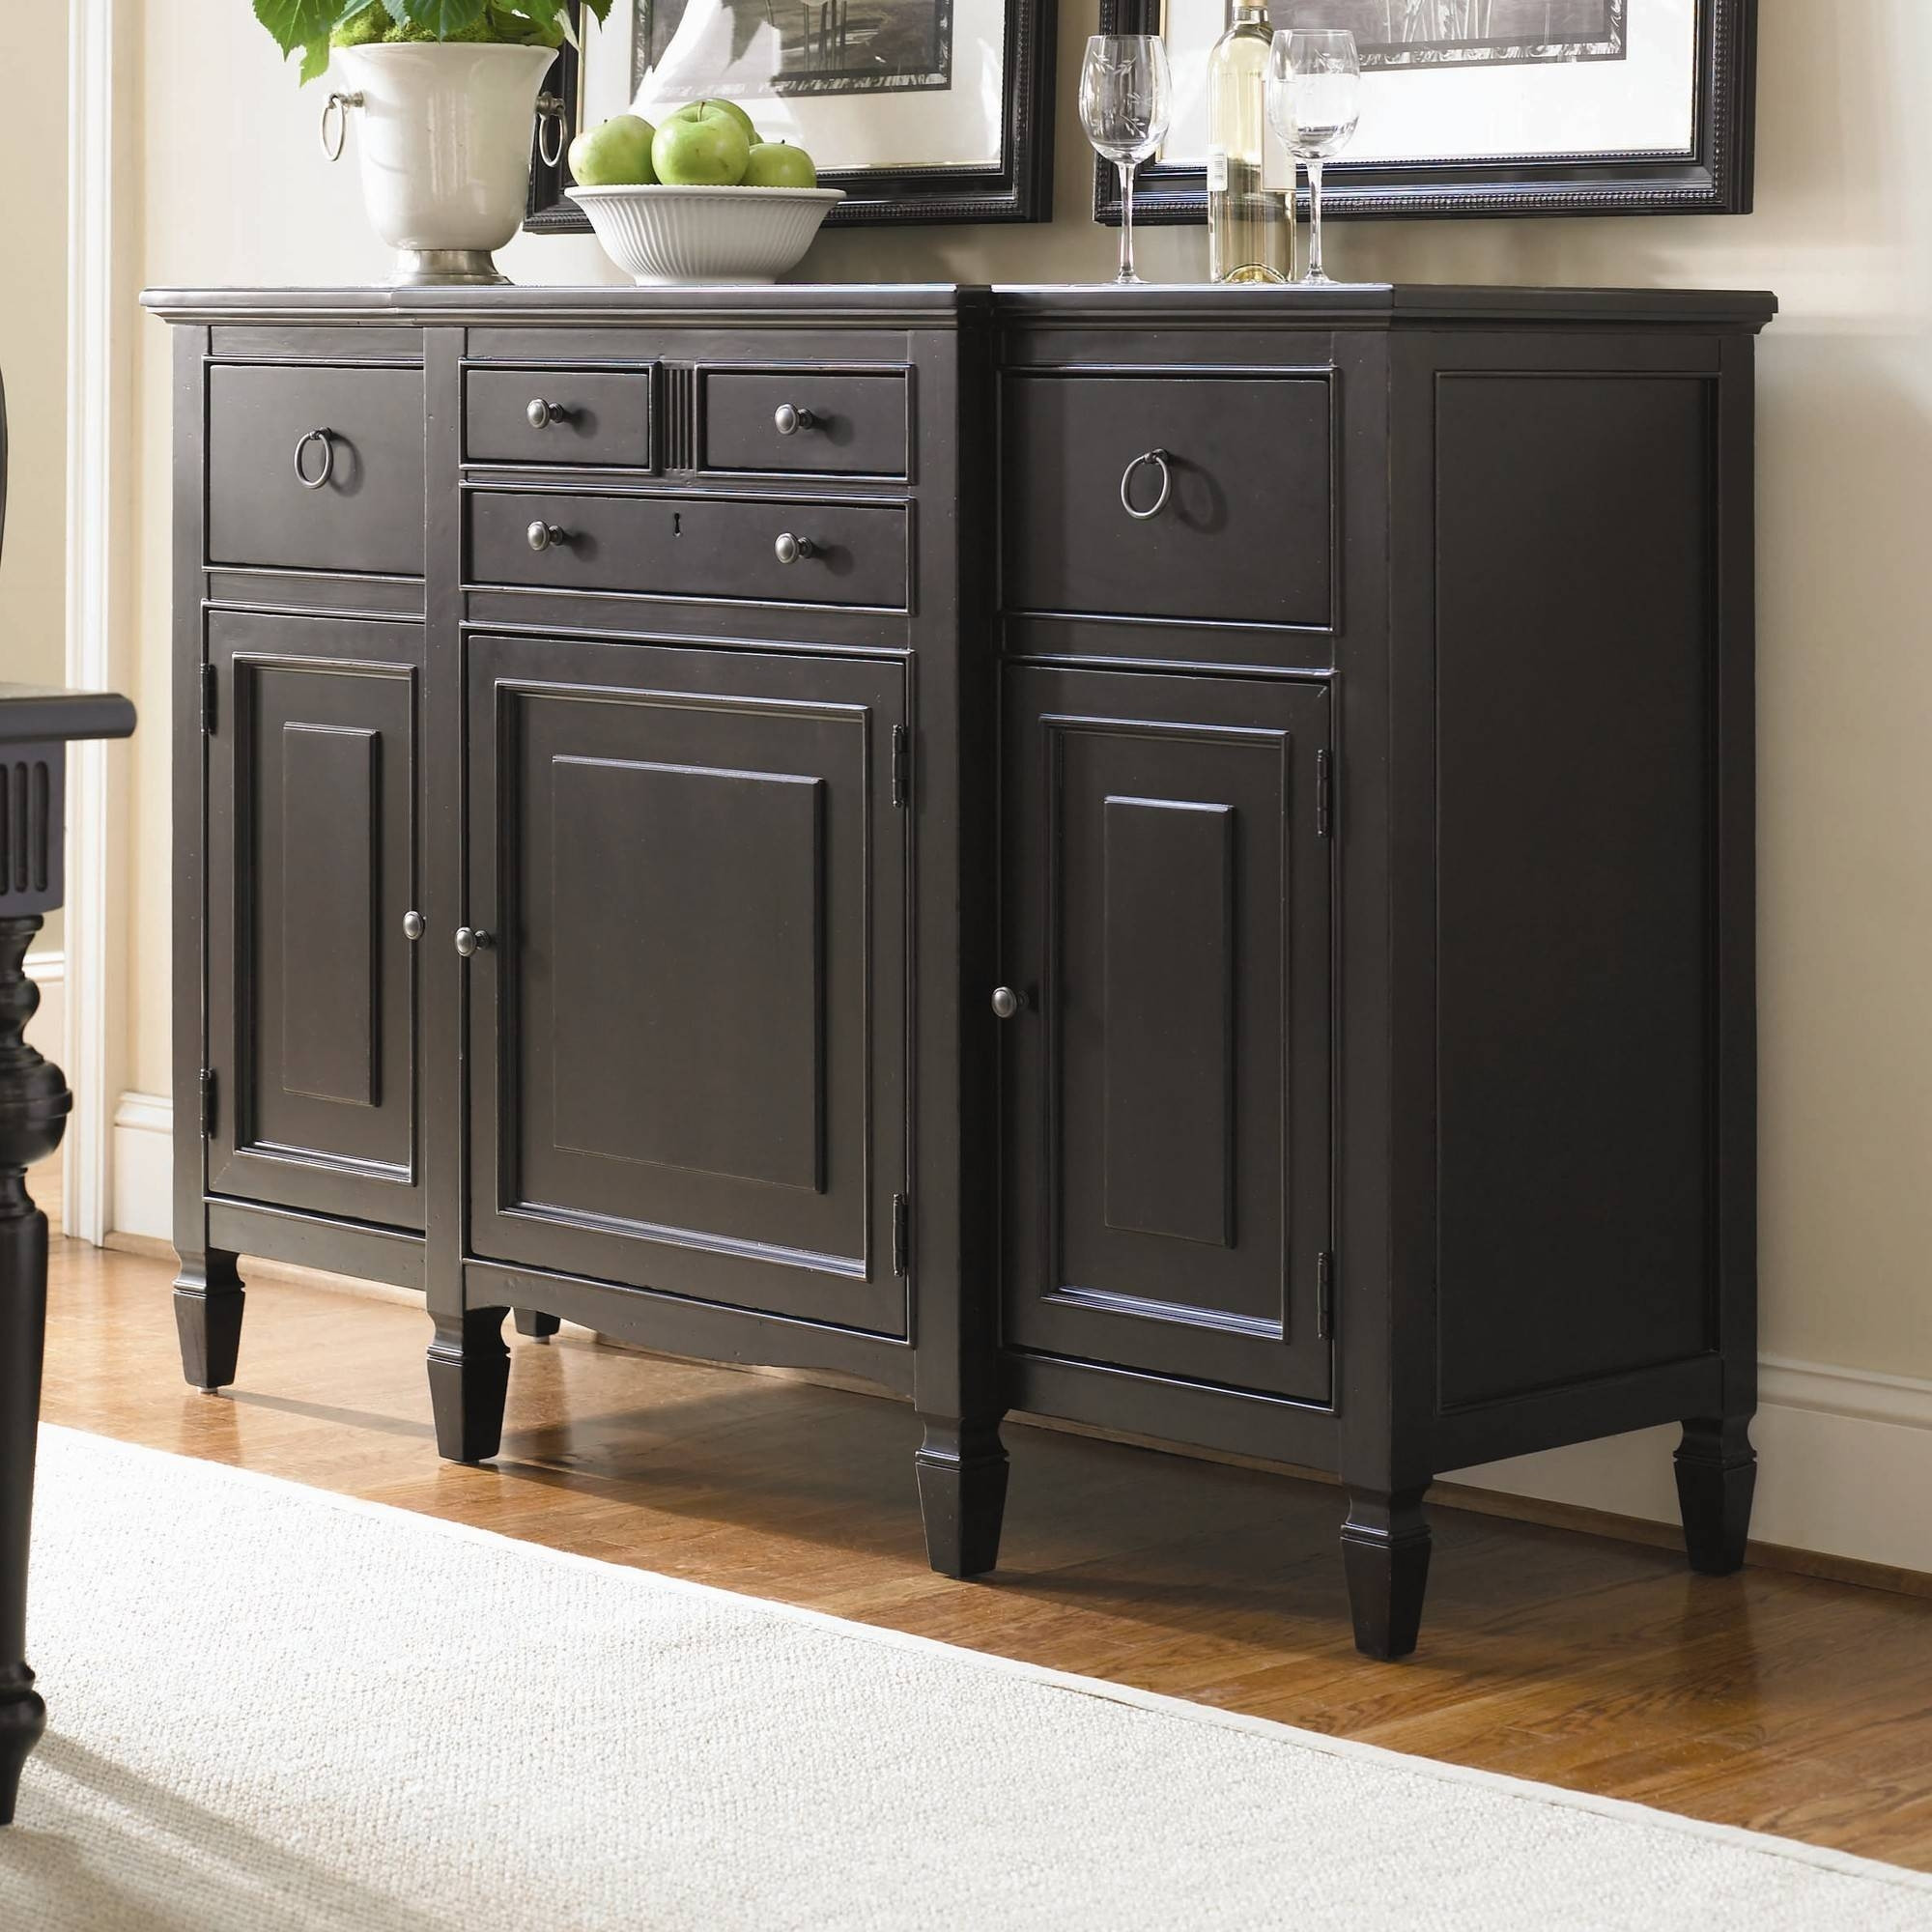 Small Kitchen Buffet Cabinet
 15 Collection of Small Dining Room Sideboards